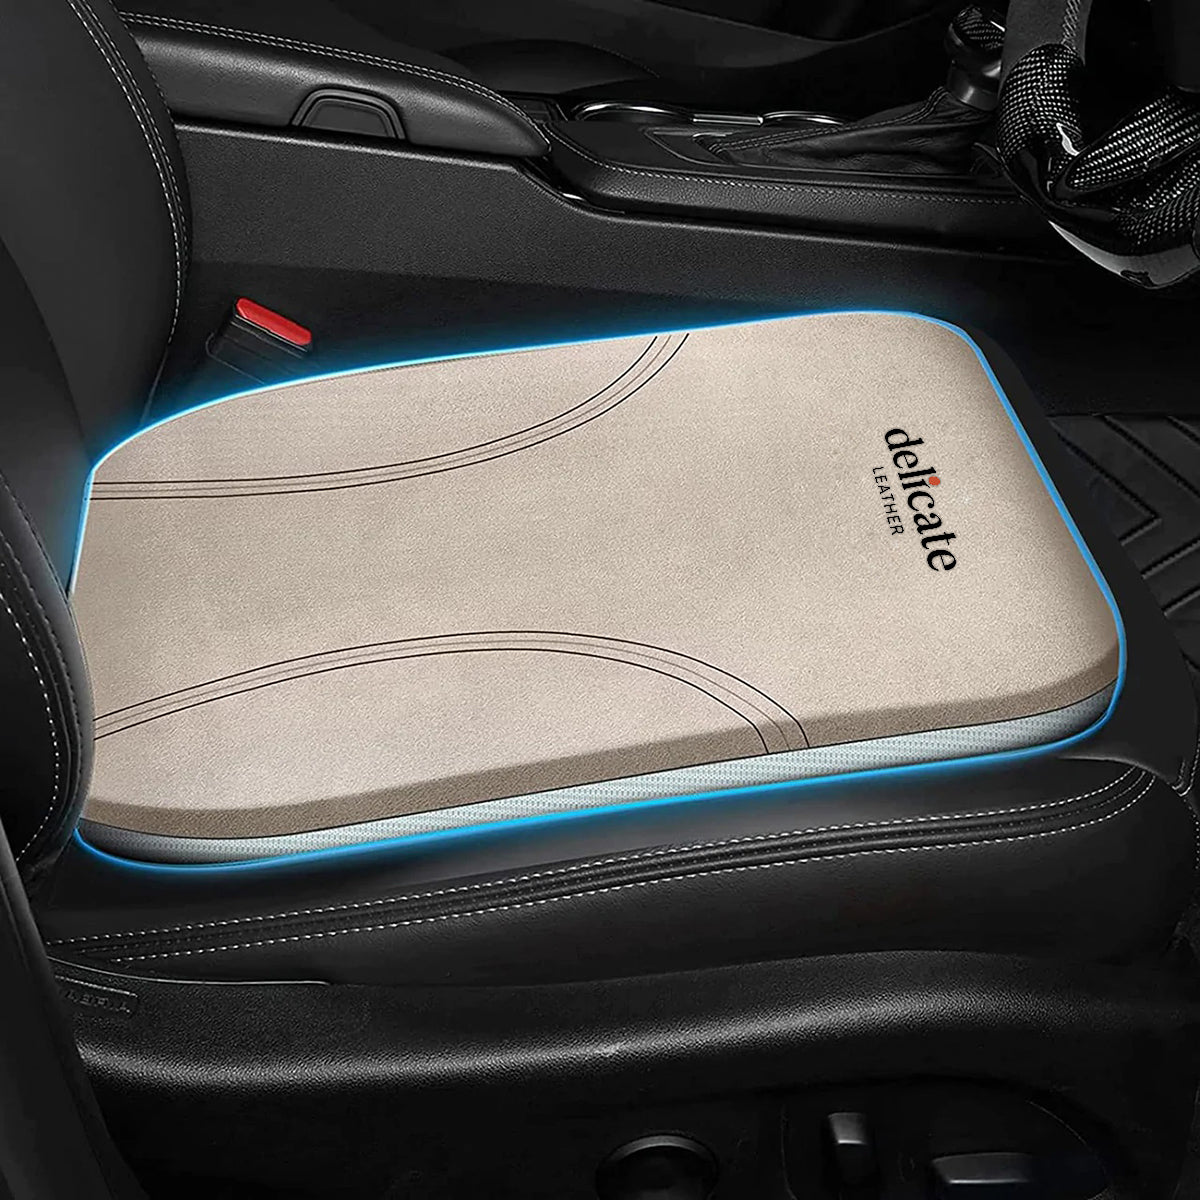 Mazda Car Seat Cushion: Enhance Comfort and Support for Your Drive